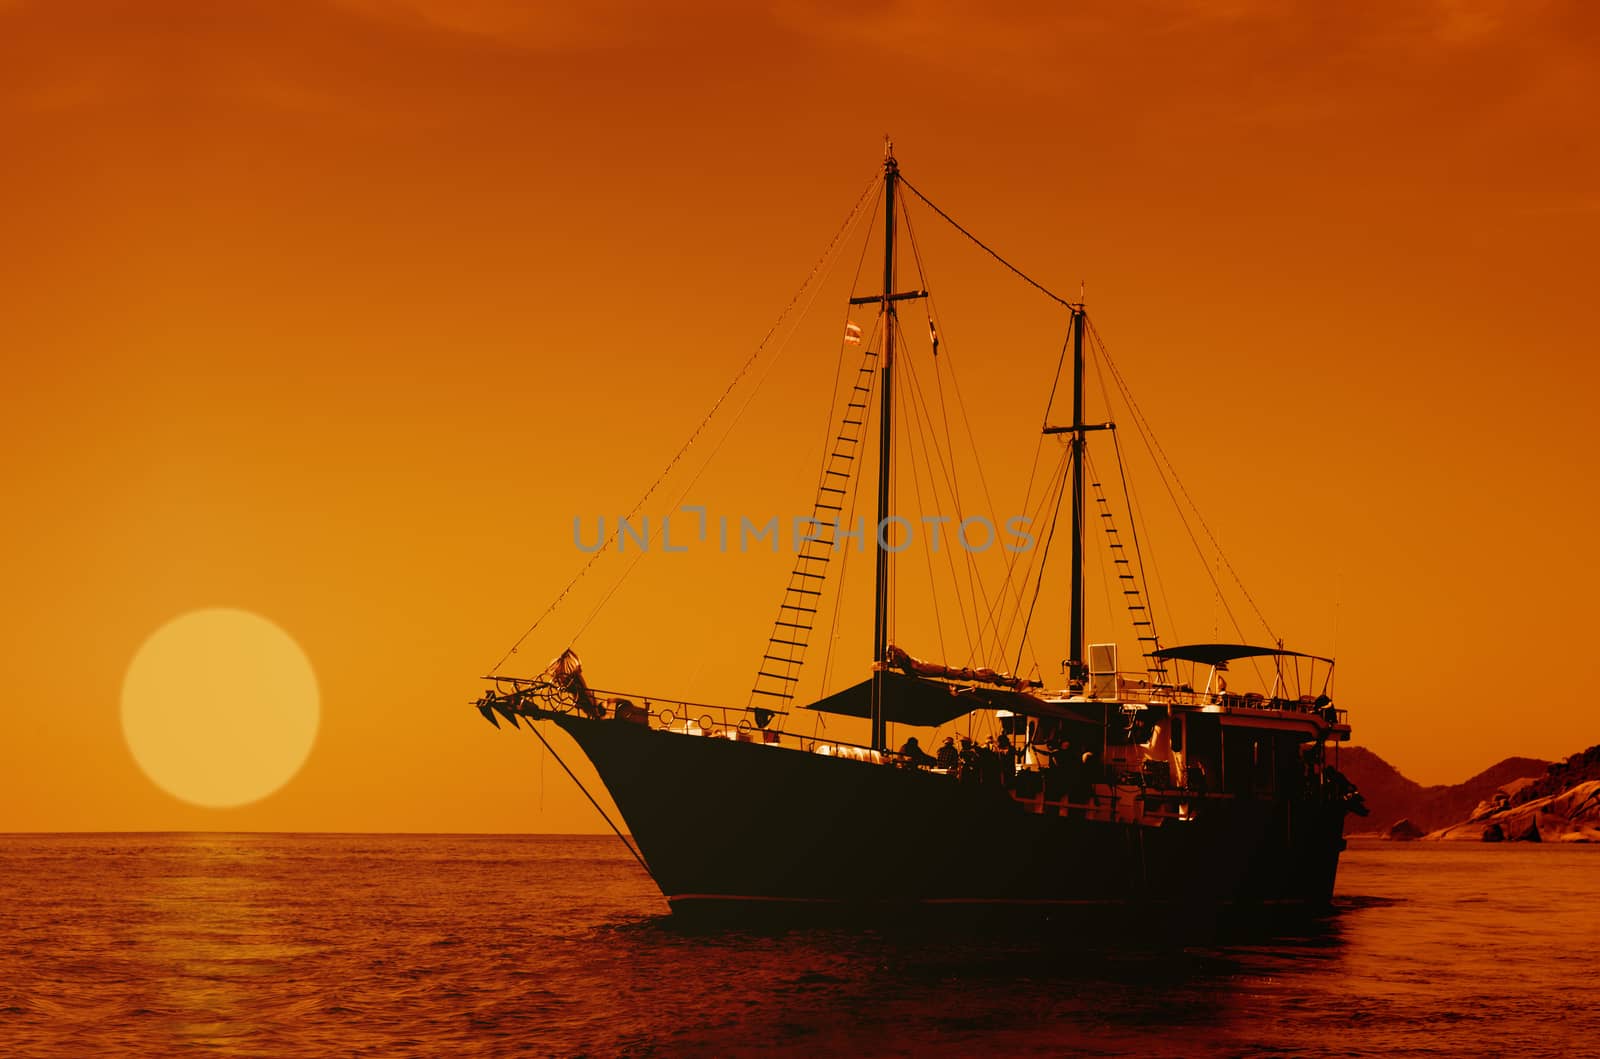 Sailing ship silhouette on the sea at sunset skyline. 